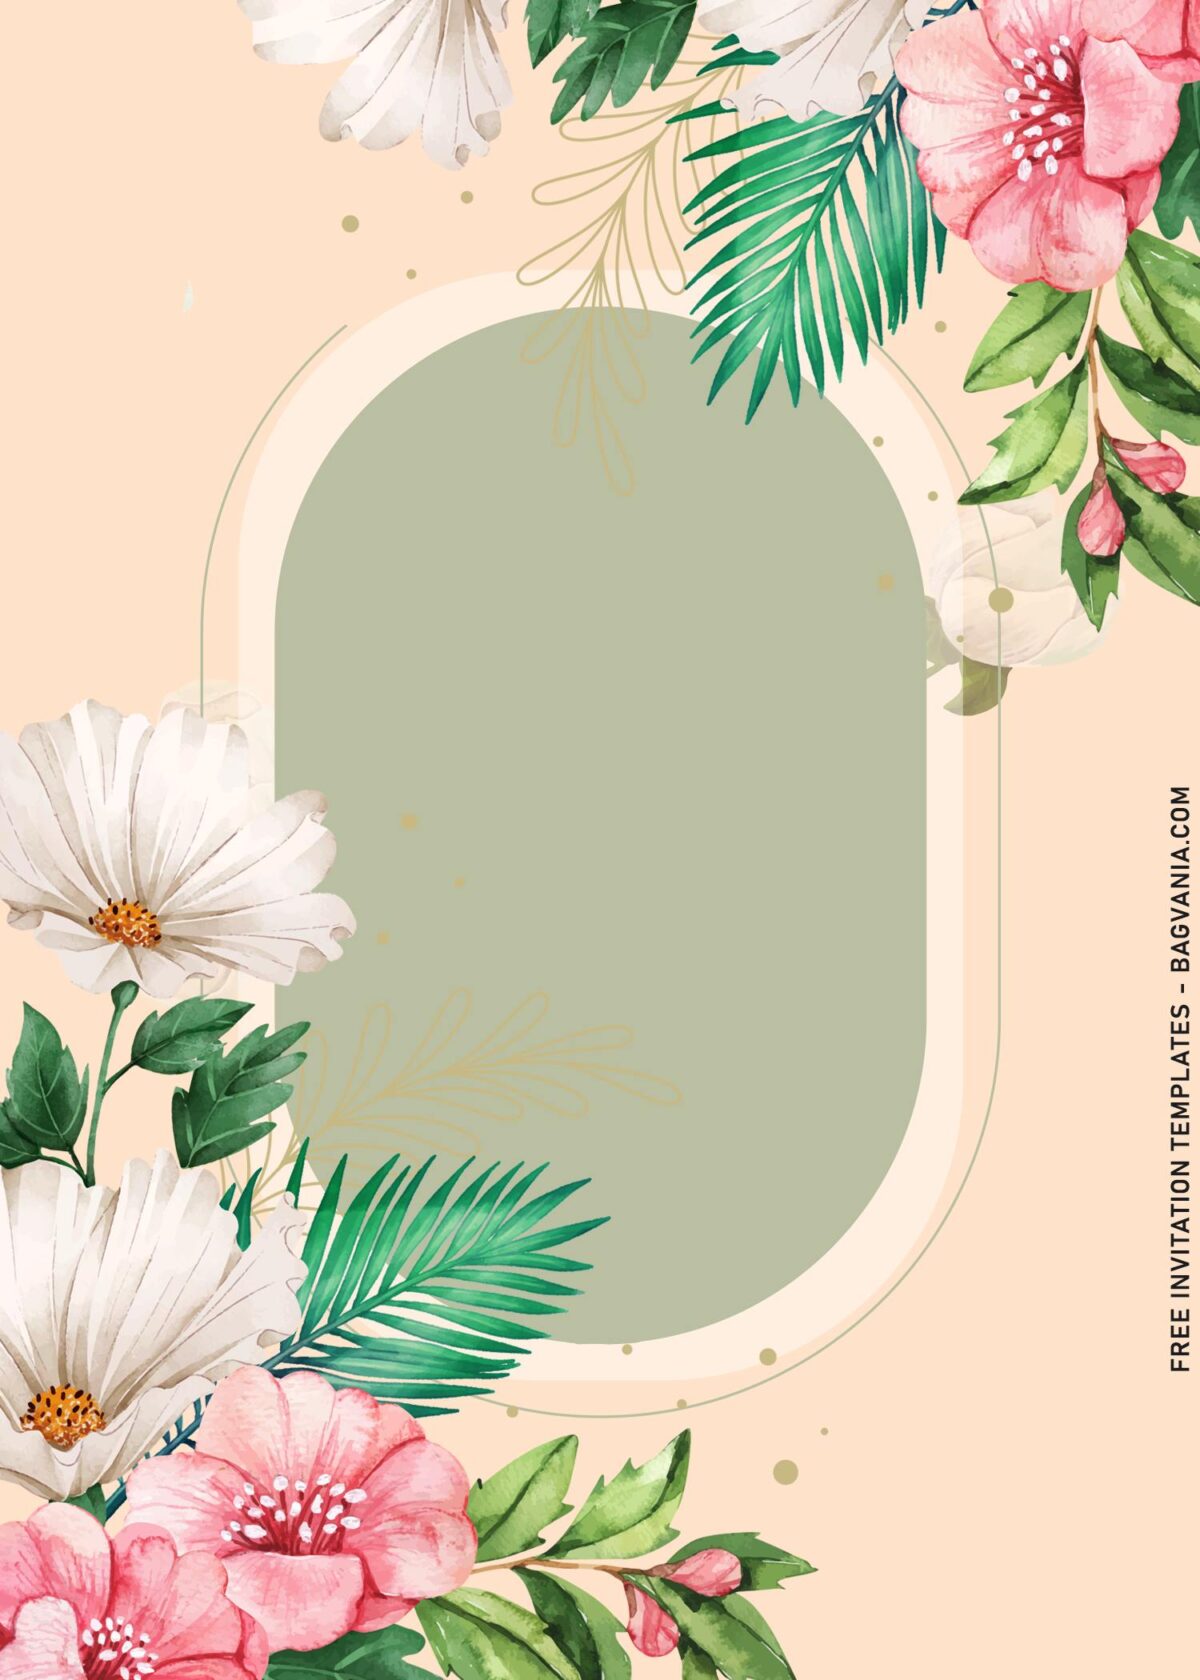 11+ Beautiful Magnolia Bouquet Birthday Invitation Templates with greenery leaves